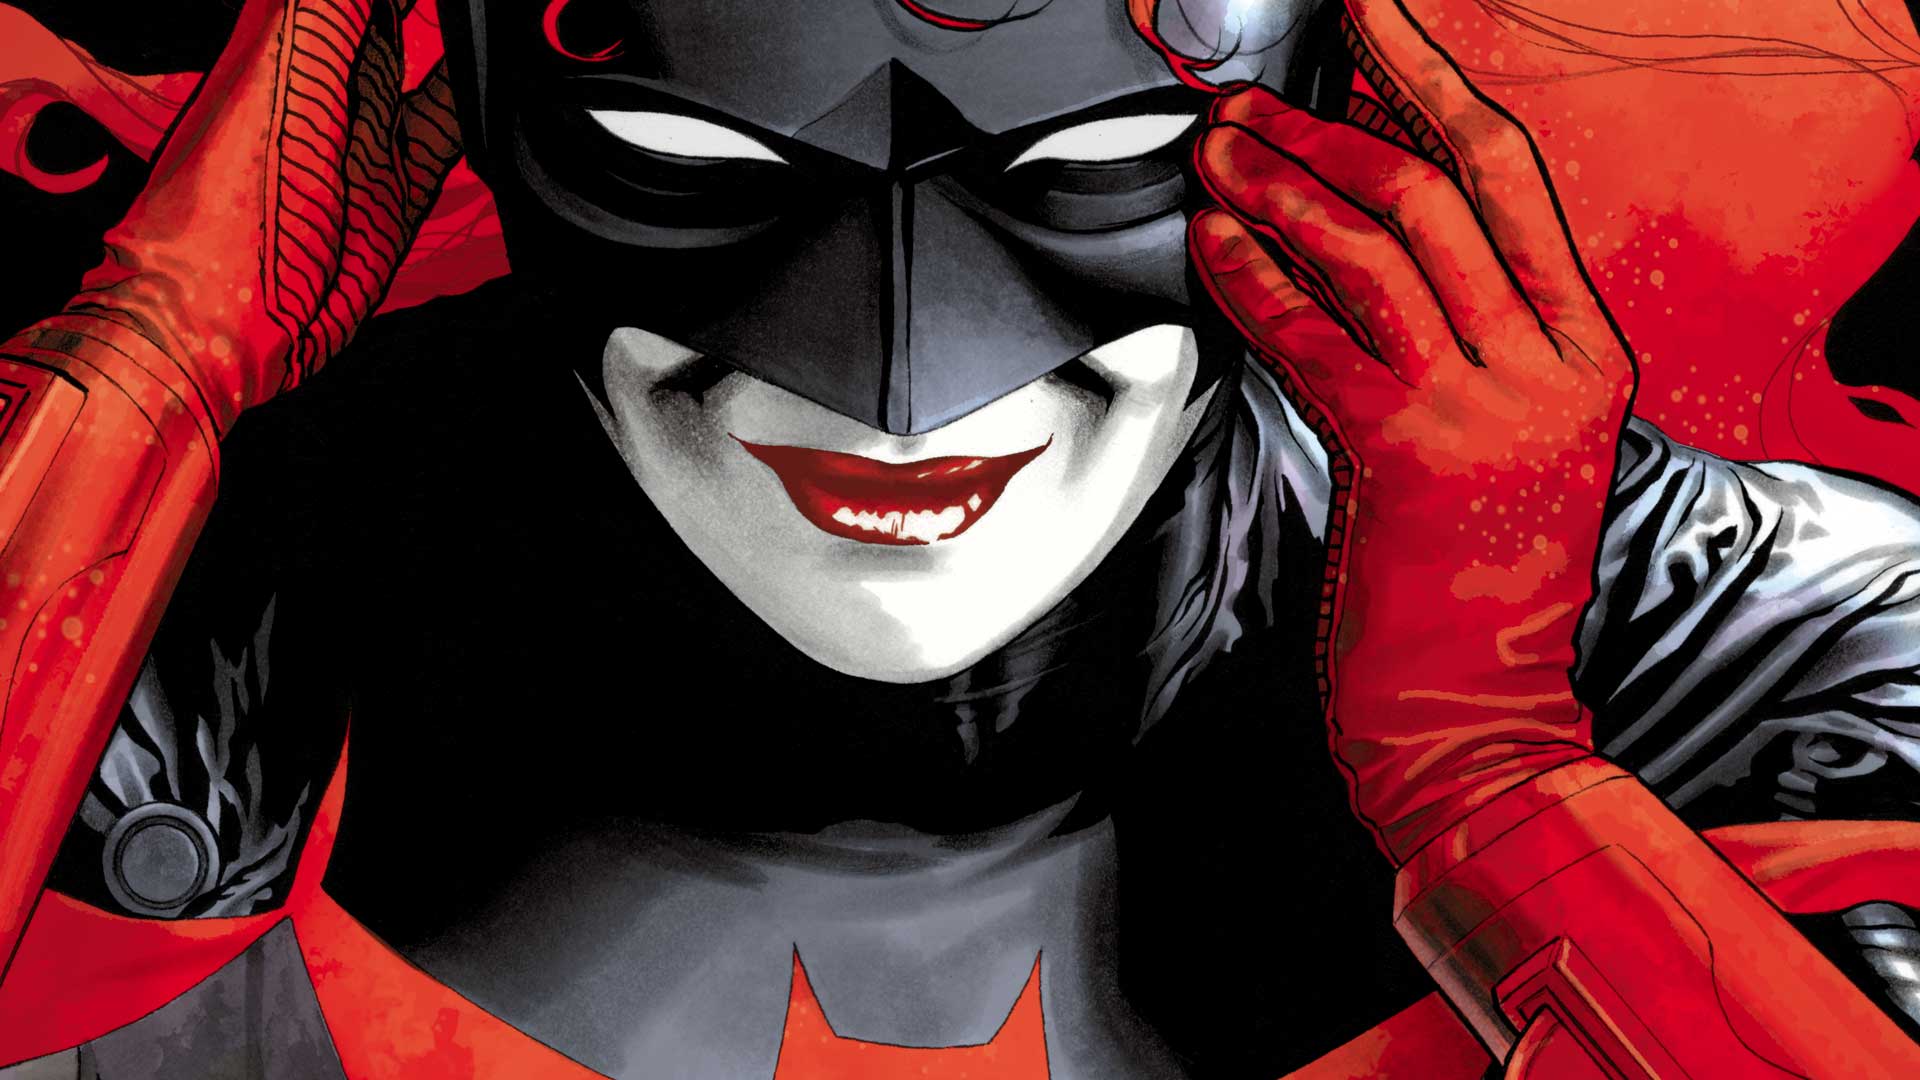 Ruby Rose Cast As Batwoman In CW Crossover